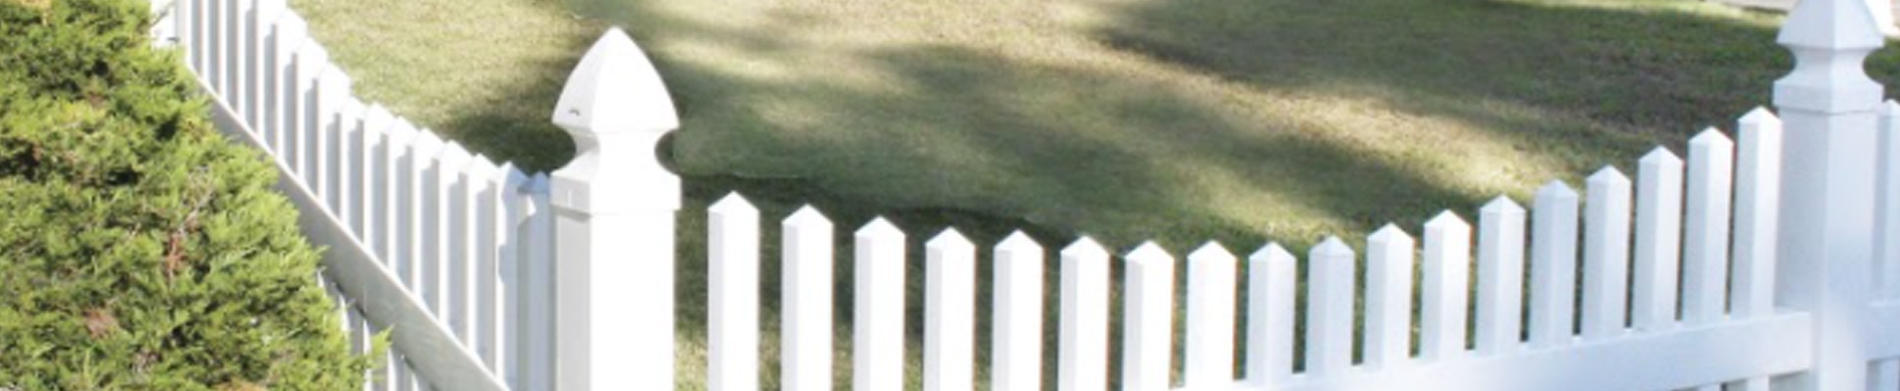 traditional vinyl fence